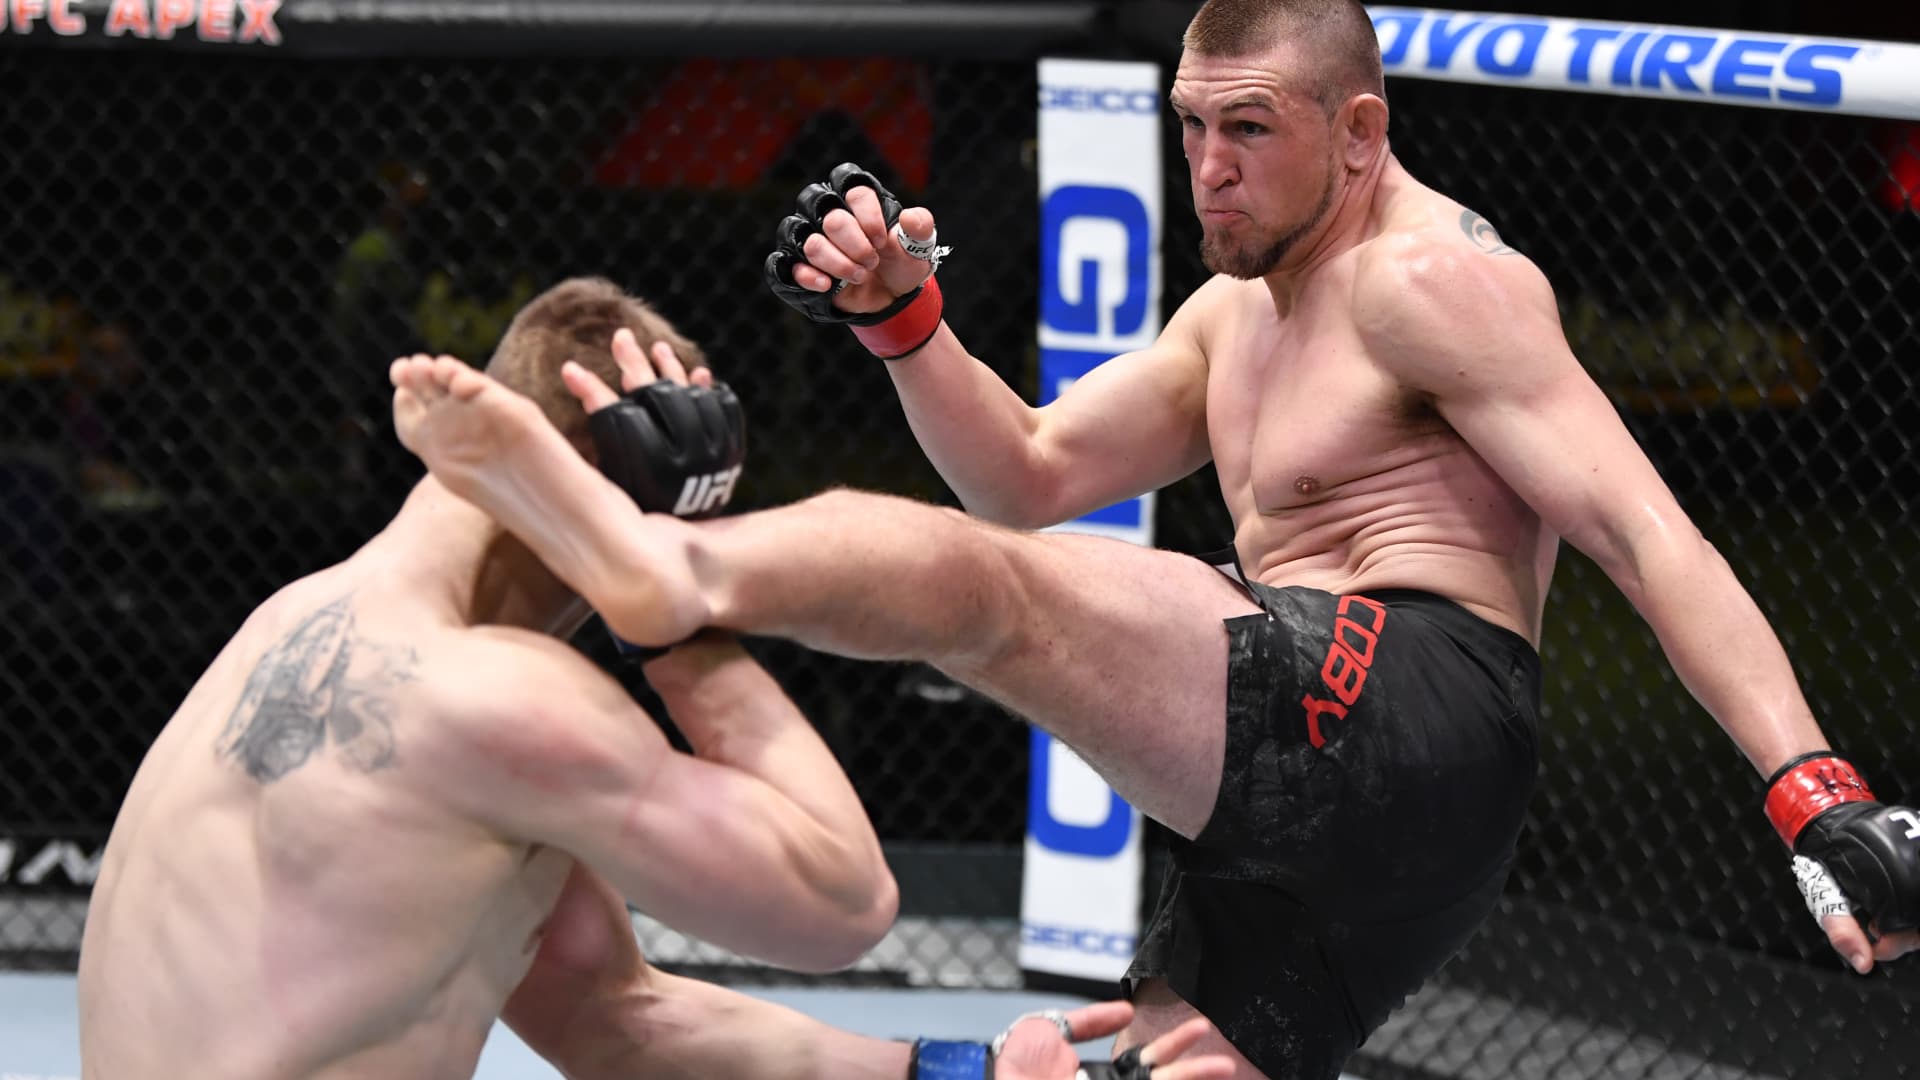 In this handout image provided by UFC, (R-L) Dustin Jacoby kicks Maxim Grishin of Russia in a light heavyweight bout during the UFC Fight Night event at UFC APEX on February 27, 2021 in Las Vegas, Nevada.